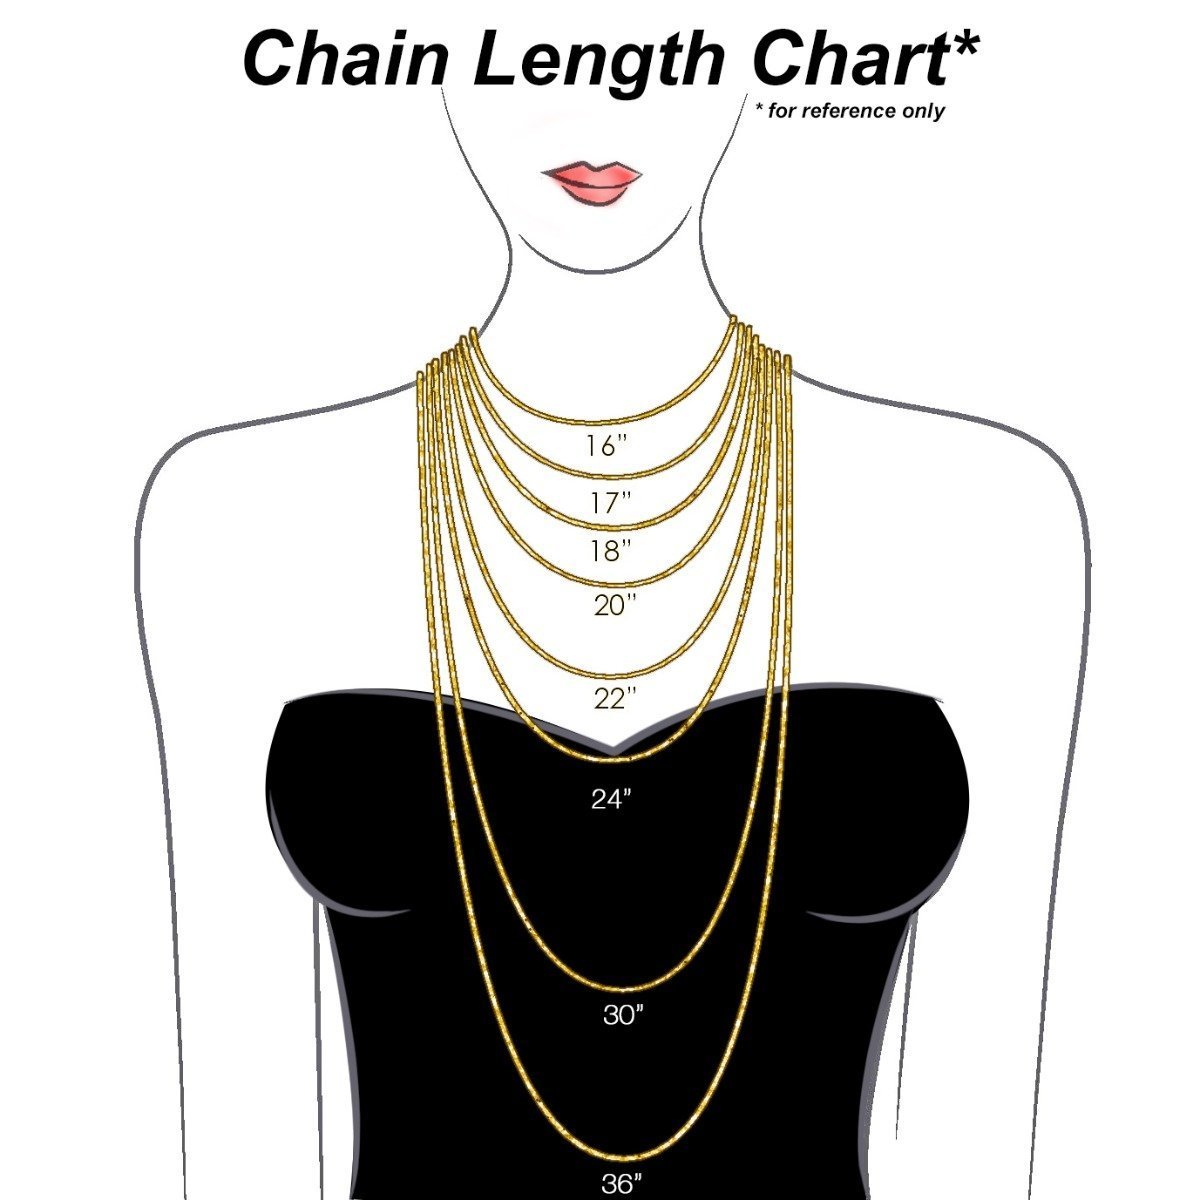 10KT Yellow Gold 2.75MM Flat Figaro Chain Necklace - 6 Lengths 16 Inch,18 Inch,20 Inch,22 Inch,24 Inch,30 Inch